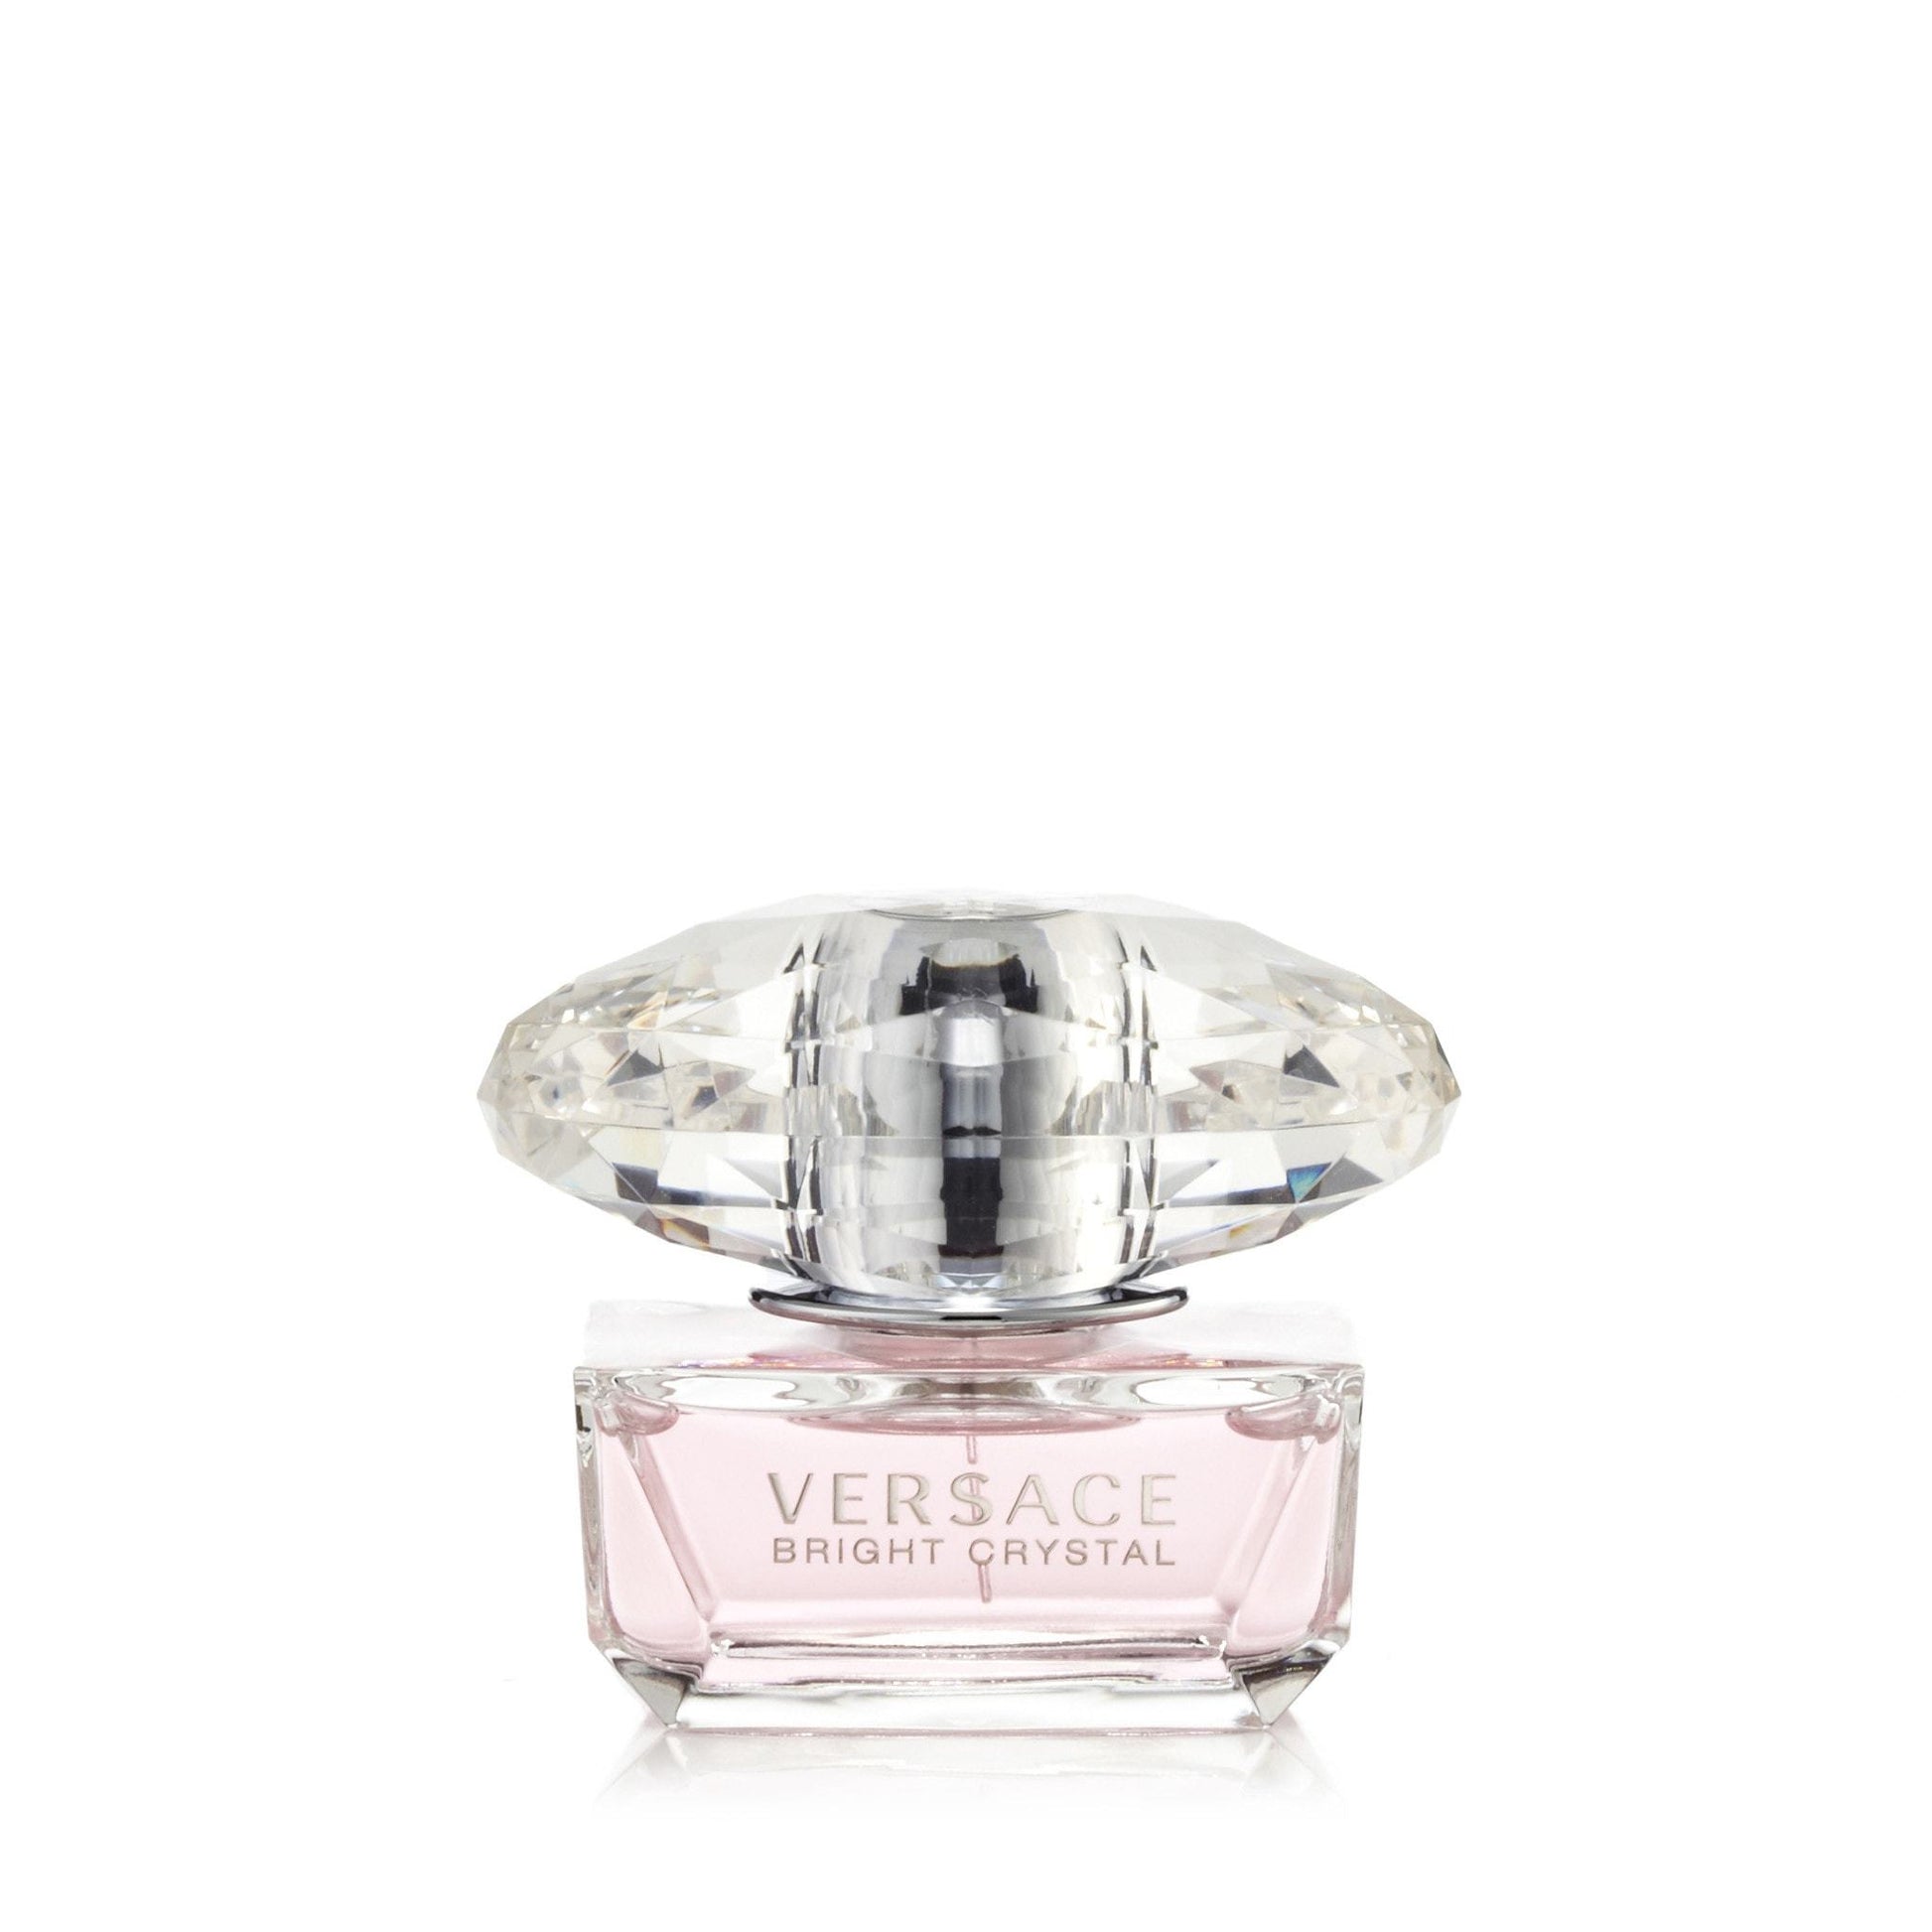 Bright Crystal Eau de Toilette Spray for Women by Versace, Product image 5